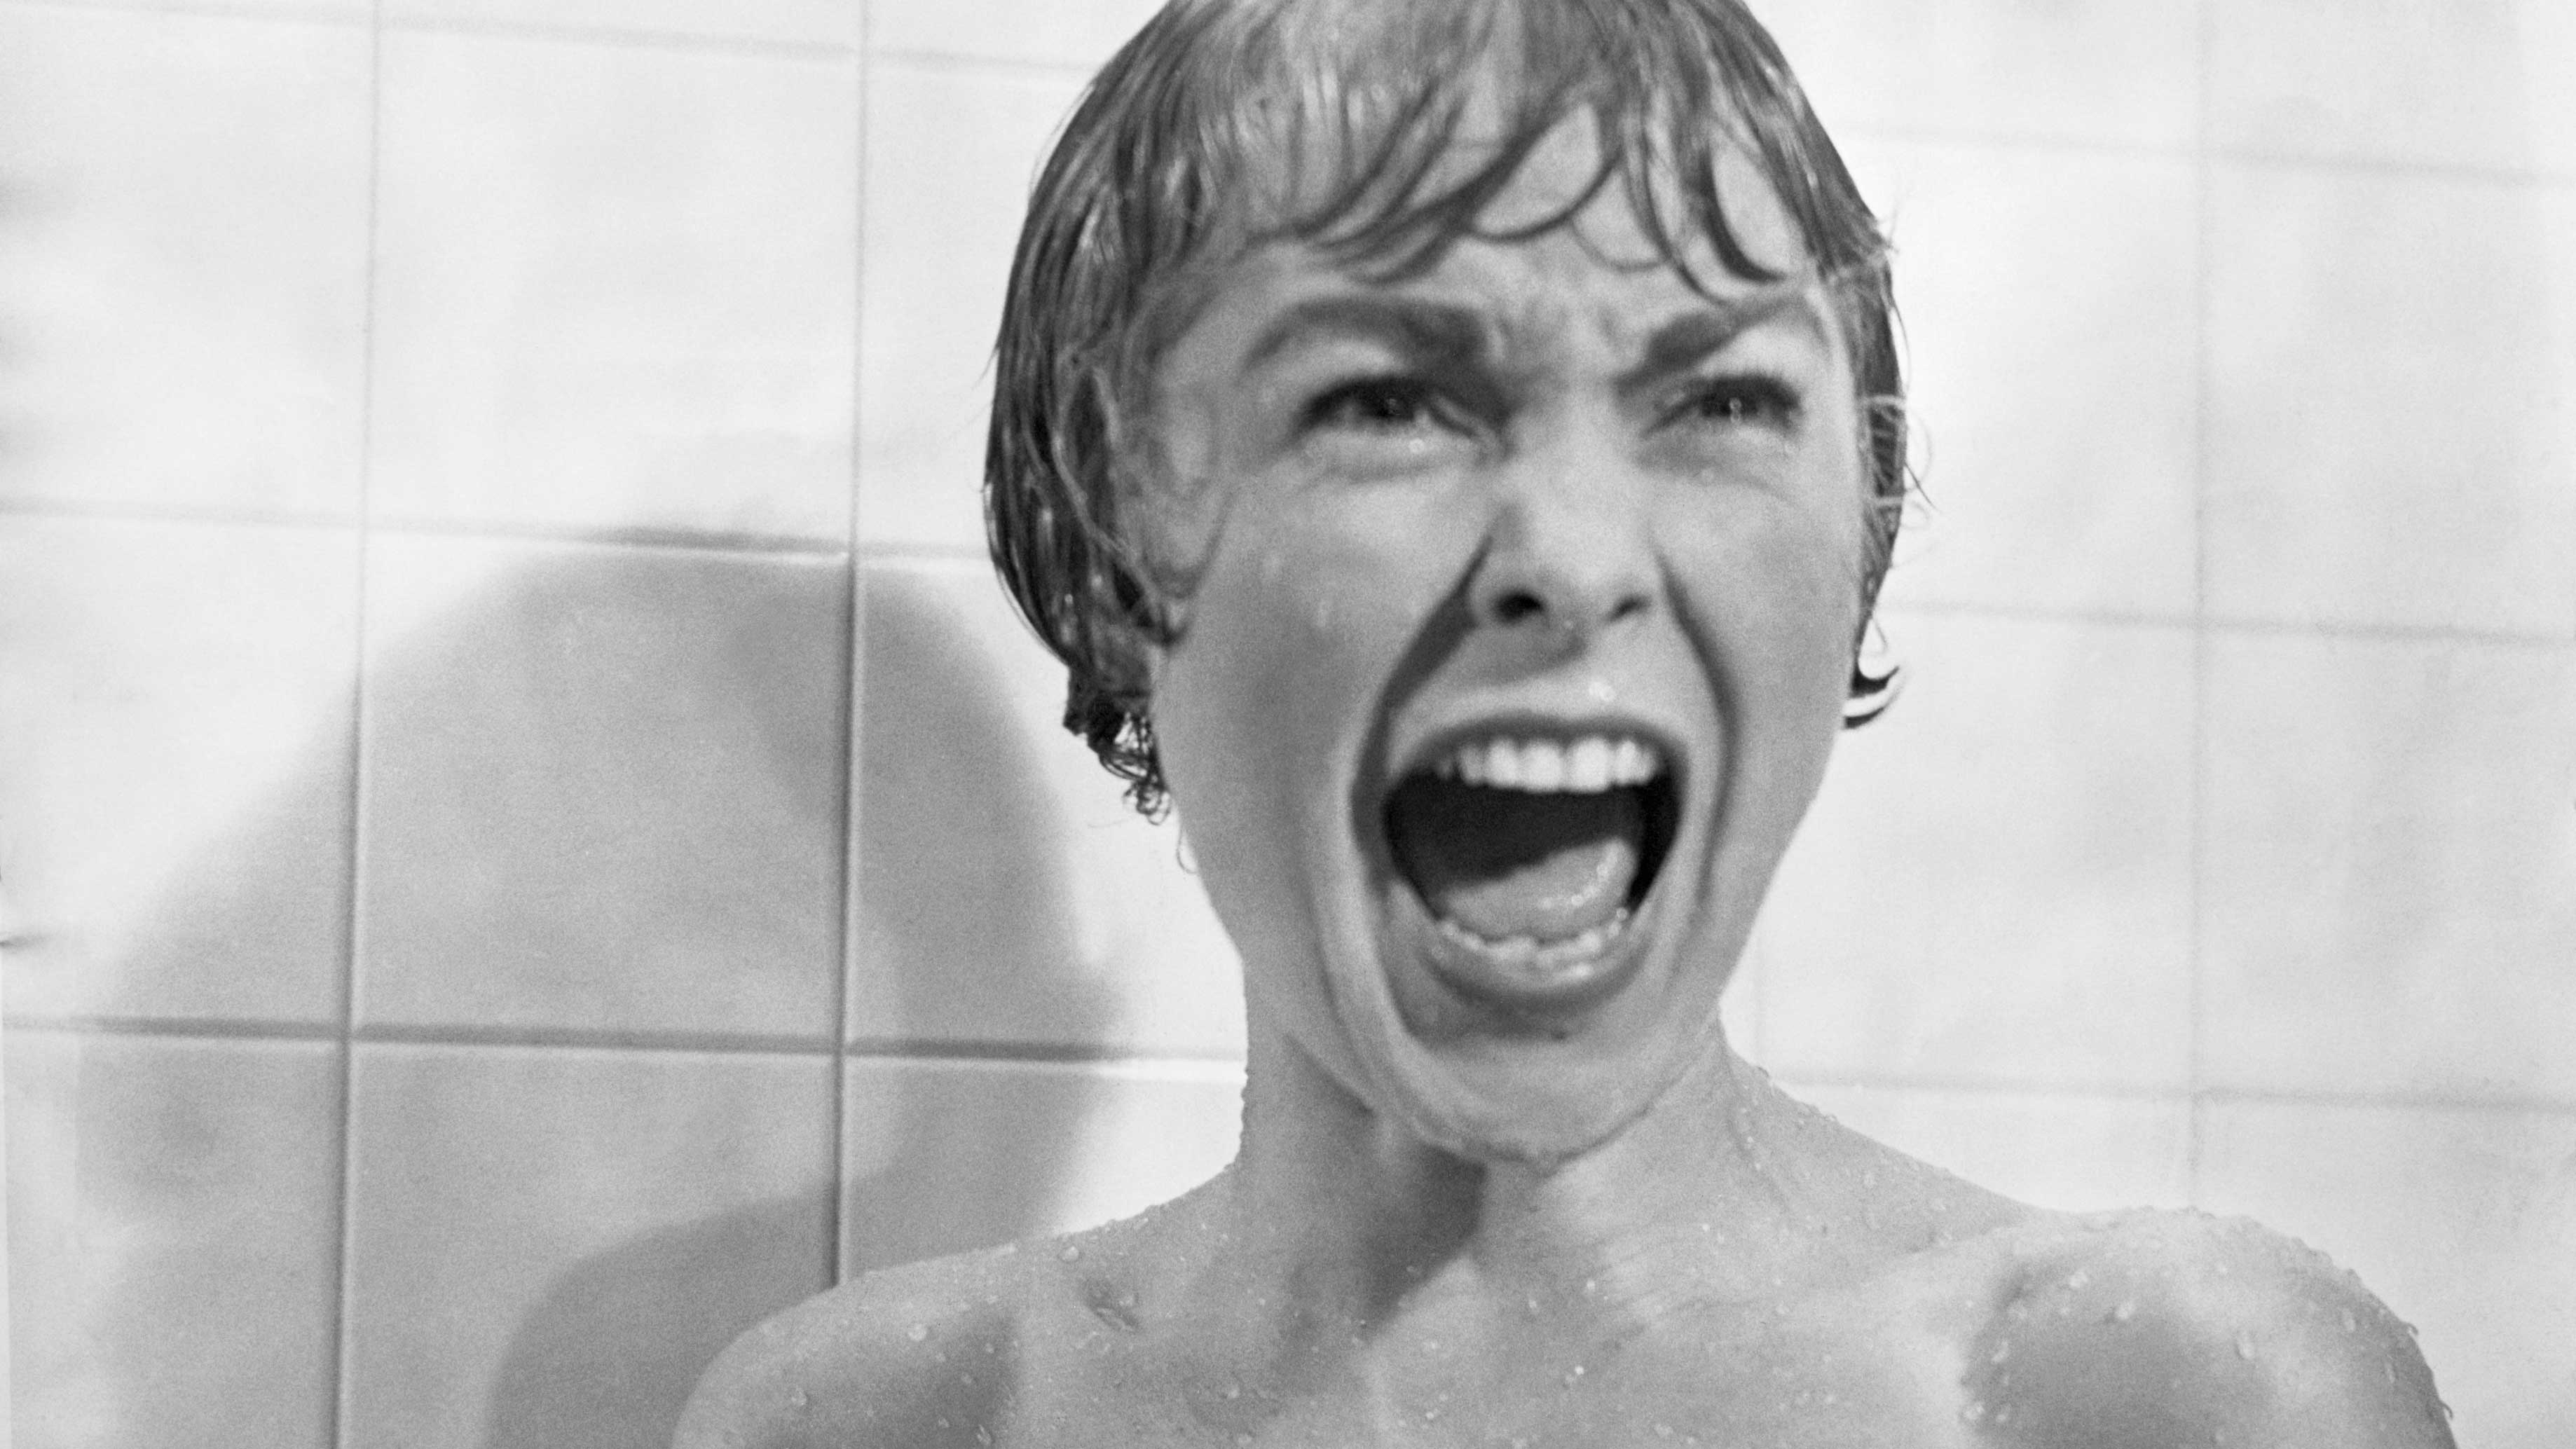 Psycho S Shower Scene How Hitchcock Upped The Terror And Fooled